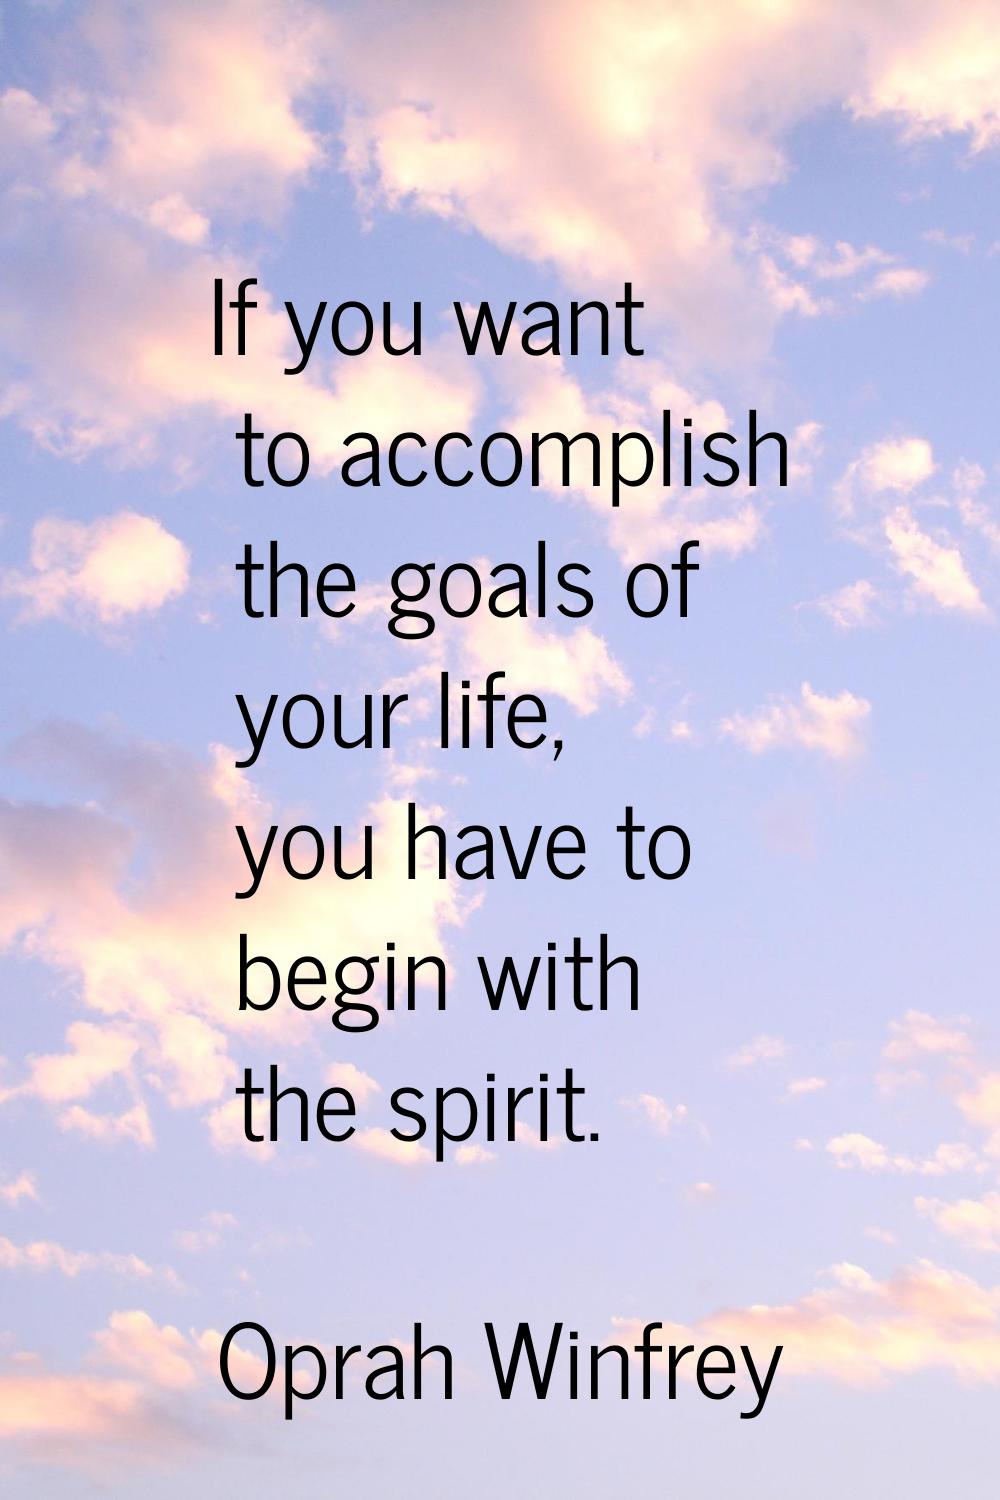 If you want to accomplish the goals of your life, you have to begin with the spirit.